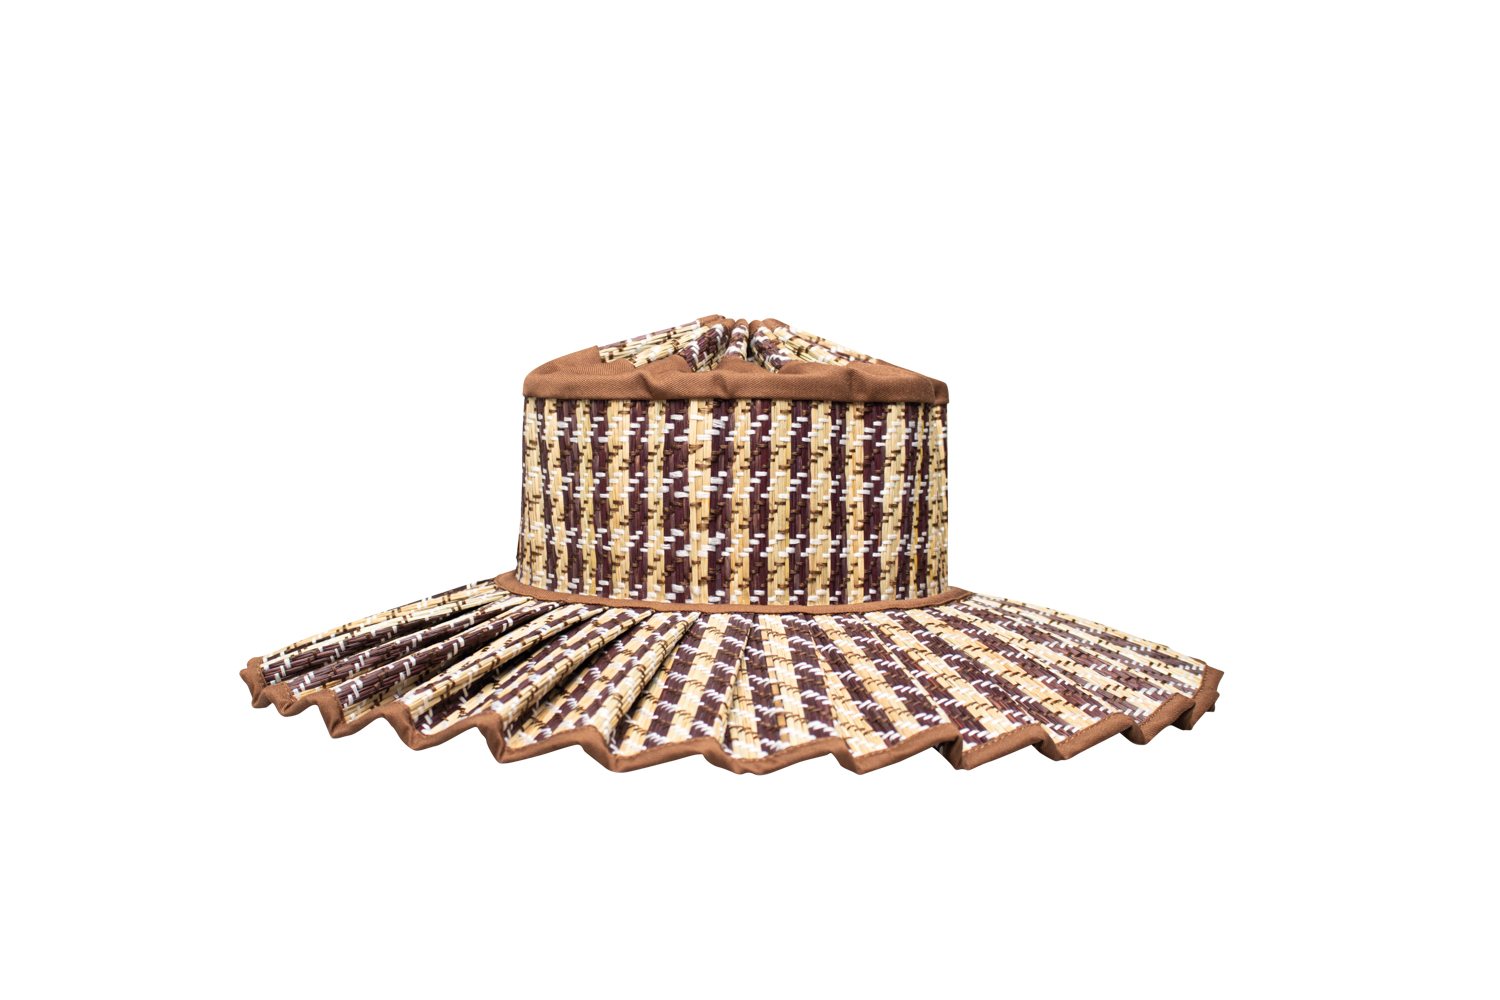 large patterned brown and white textile-based sun hat